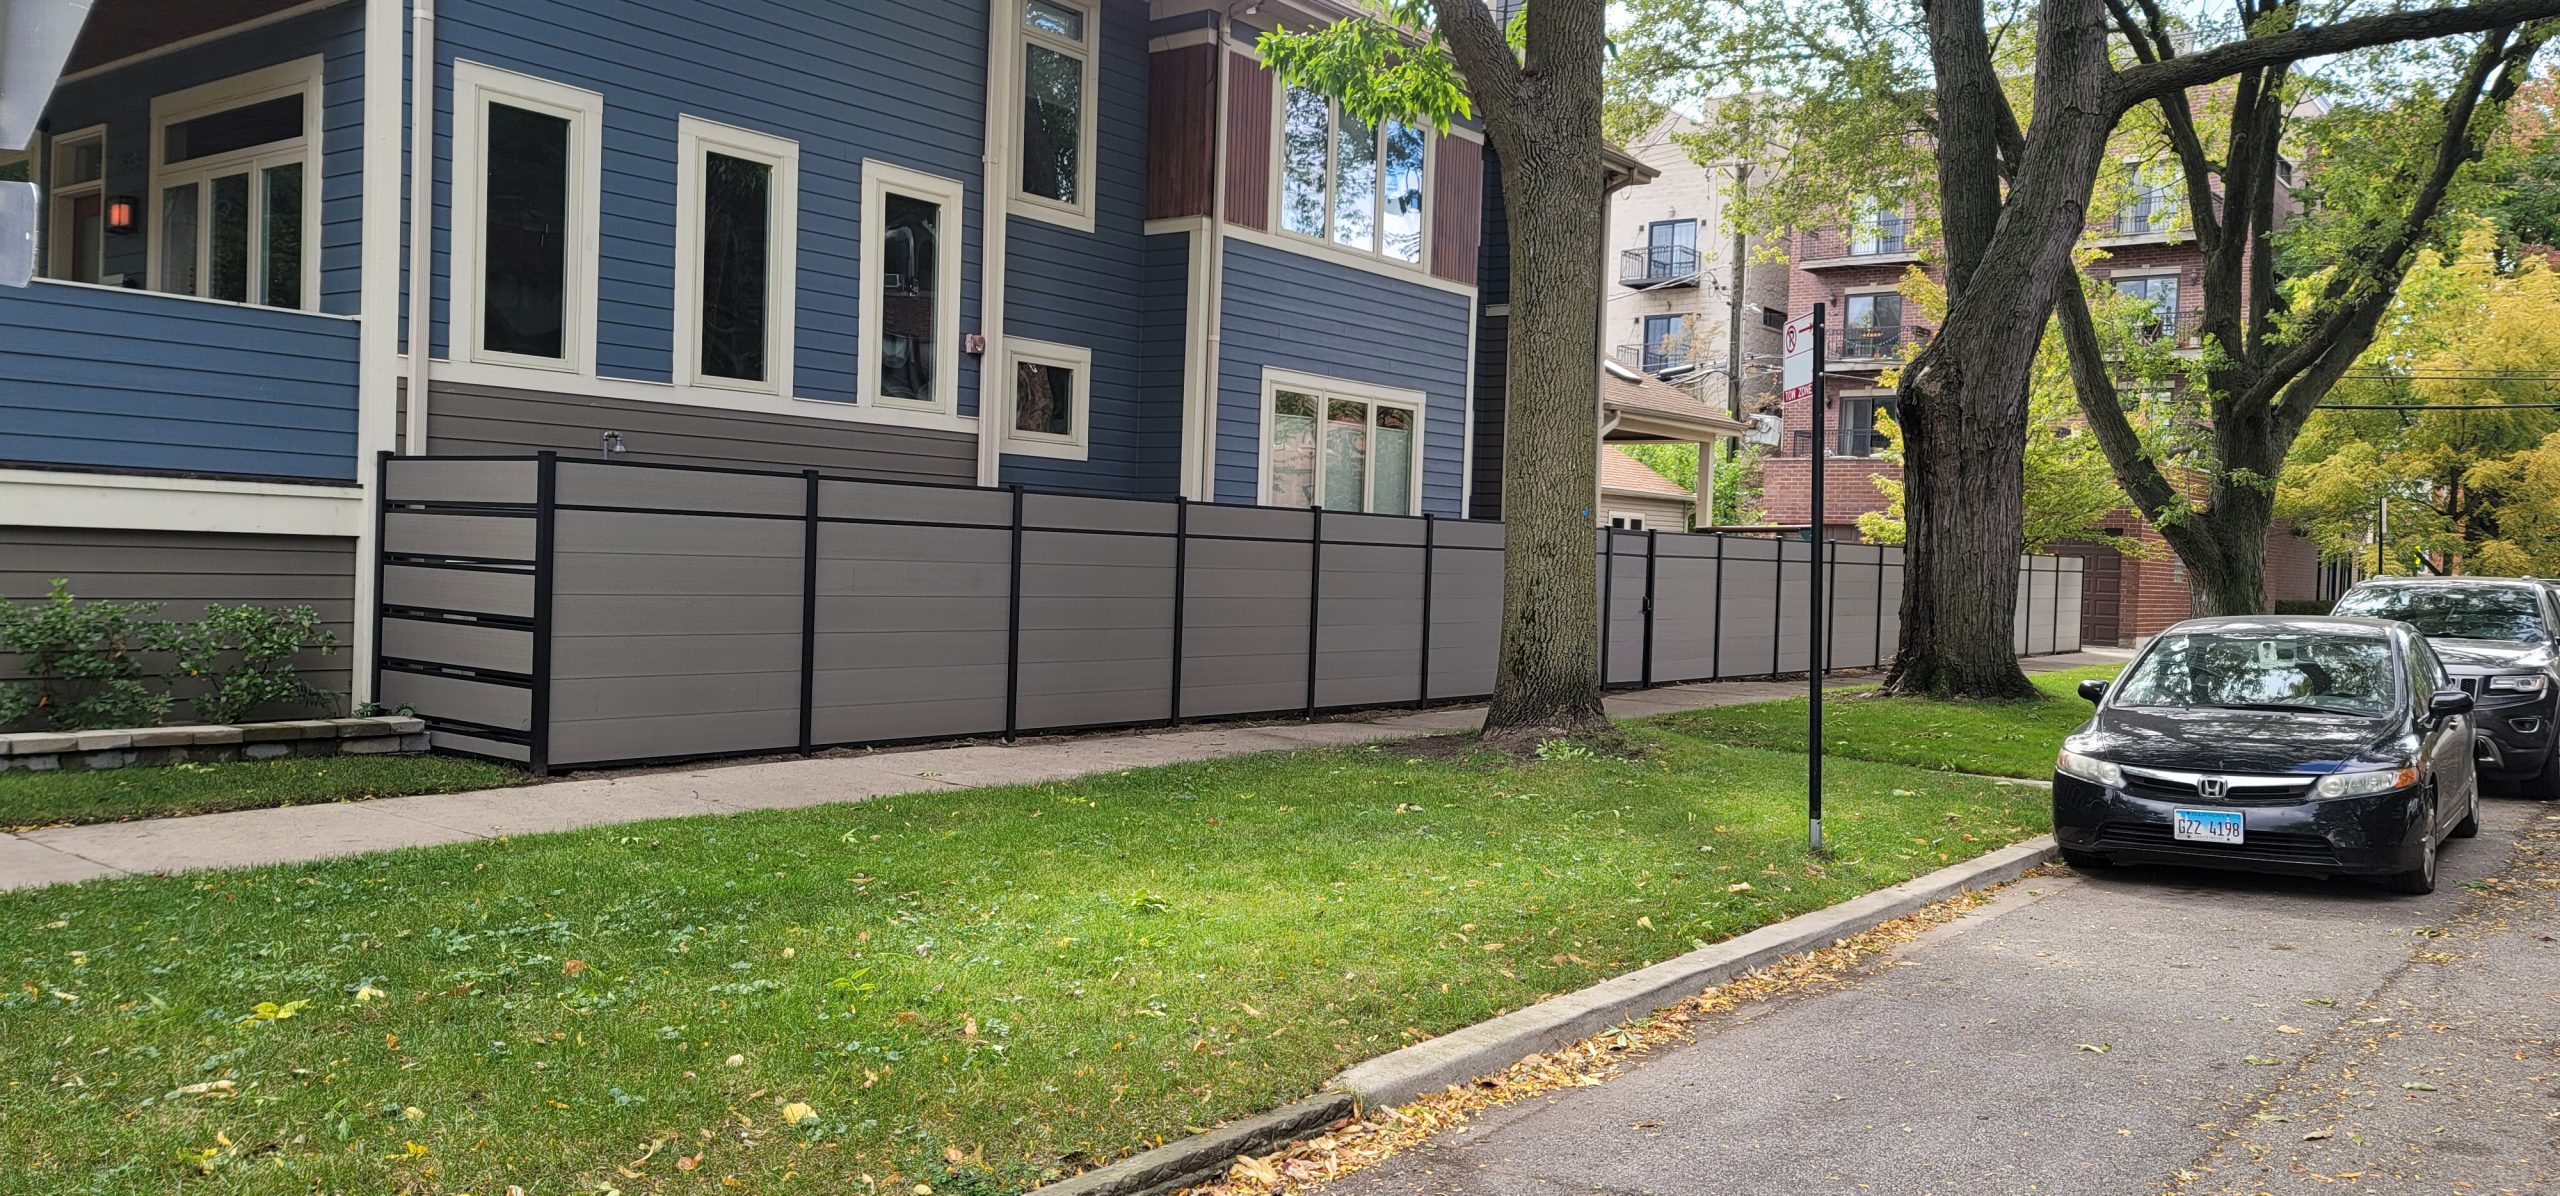 How to Maintain a Composite Fence?